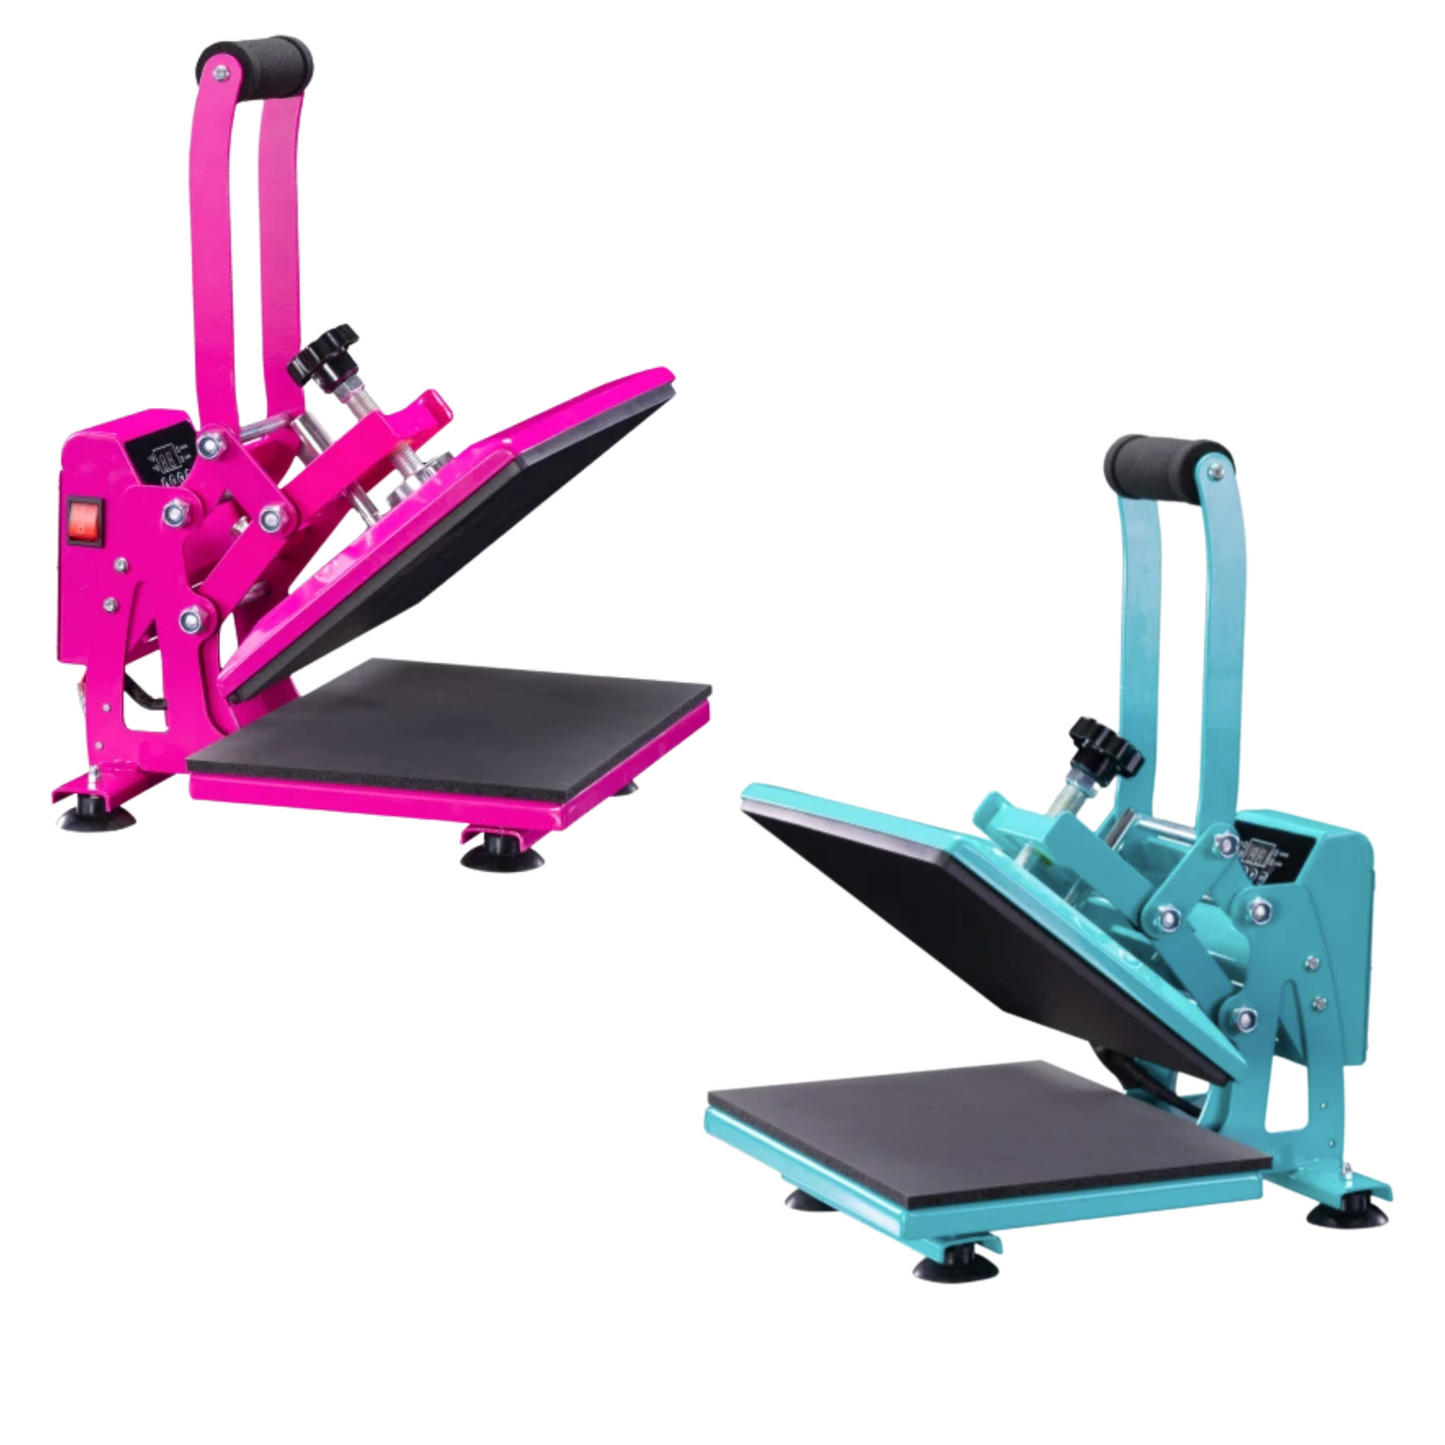 15 x 15 HEAT PRESS (LIMITED EDITION) (IF SHIPPING, MUST PURCHASE SEPARATE FROM OTHER ITEMS)